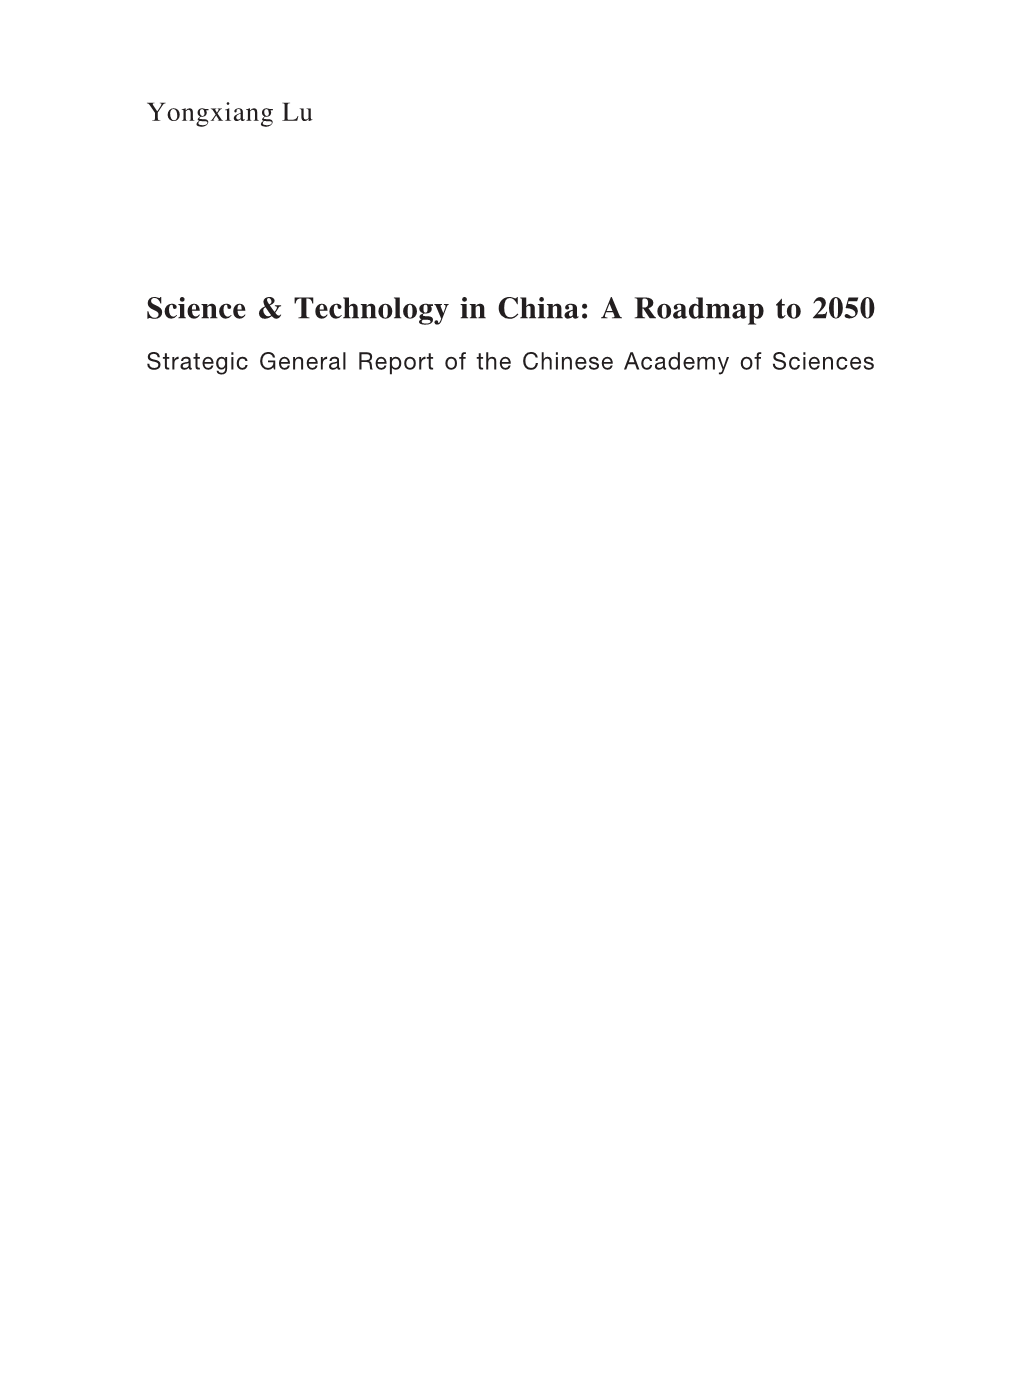 Science & Technology in China: a Roadmap to 2050